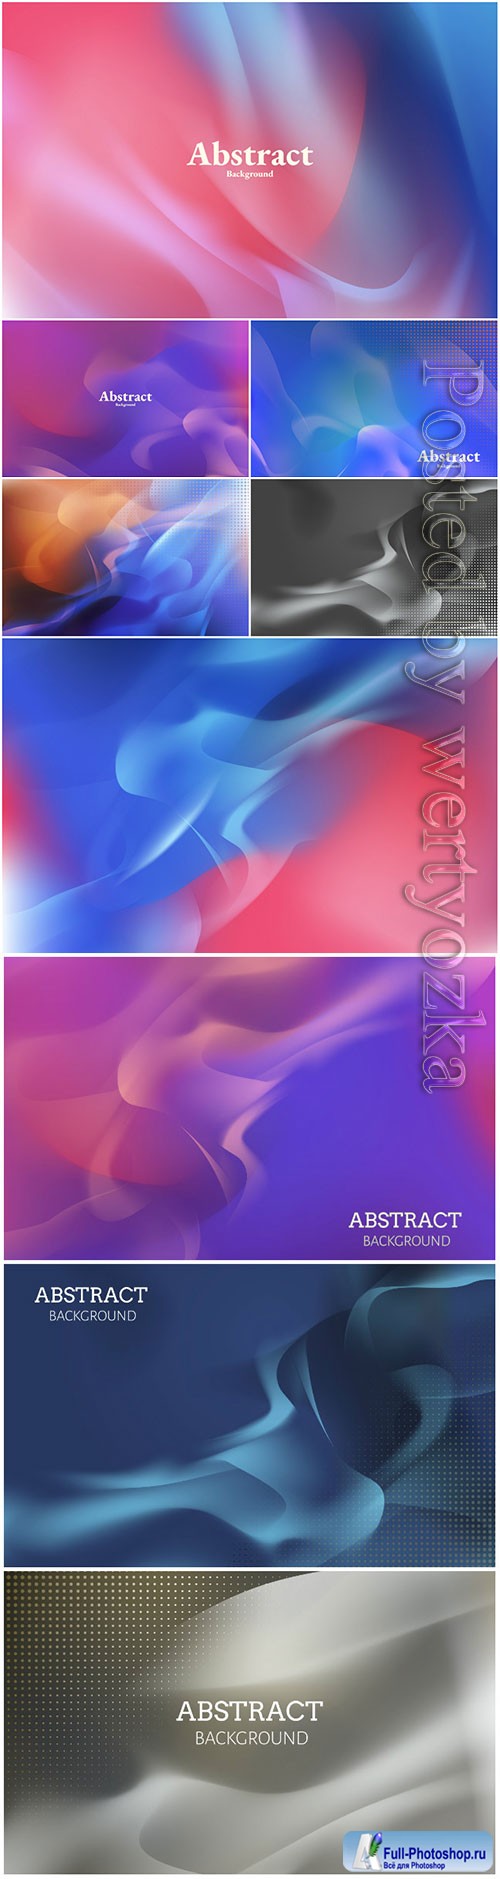 Abstract wavy vector background